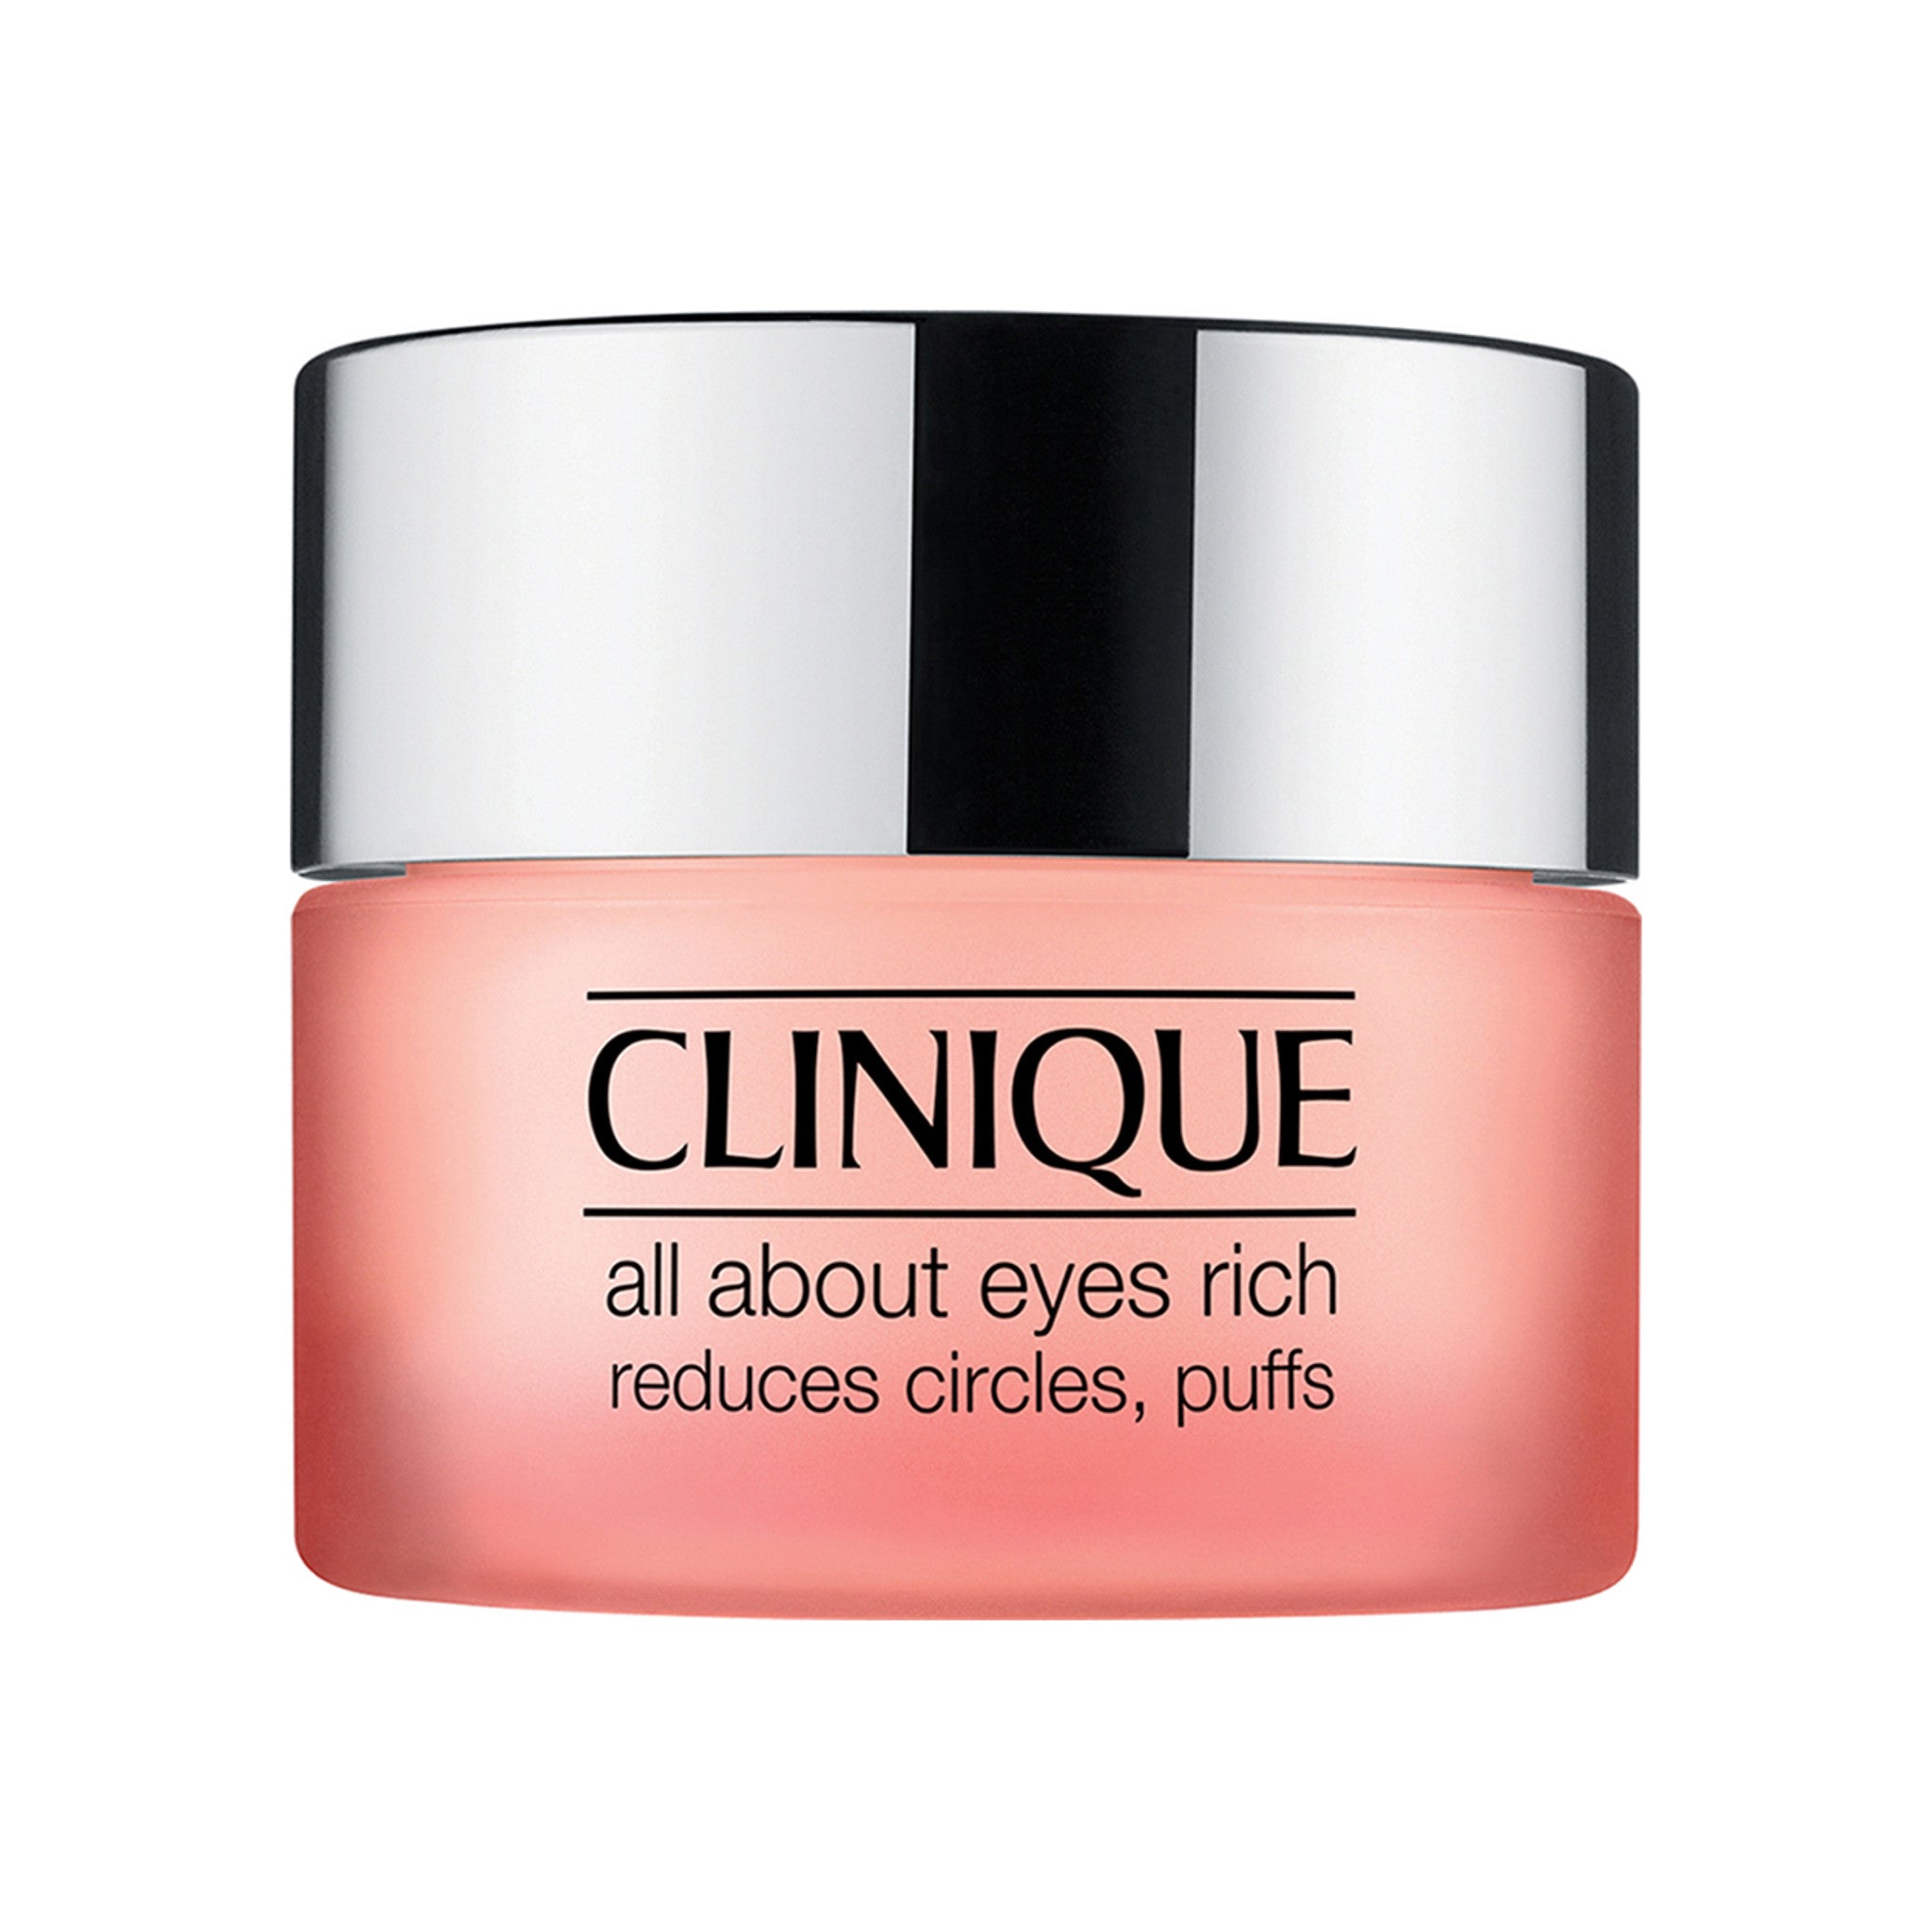 Clinique All About Eyes Rich Eye Cream Size variant: 0.5 Oz